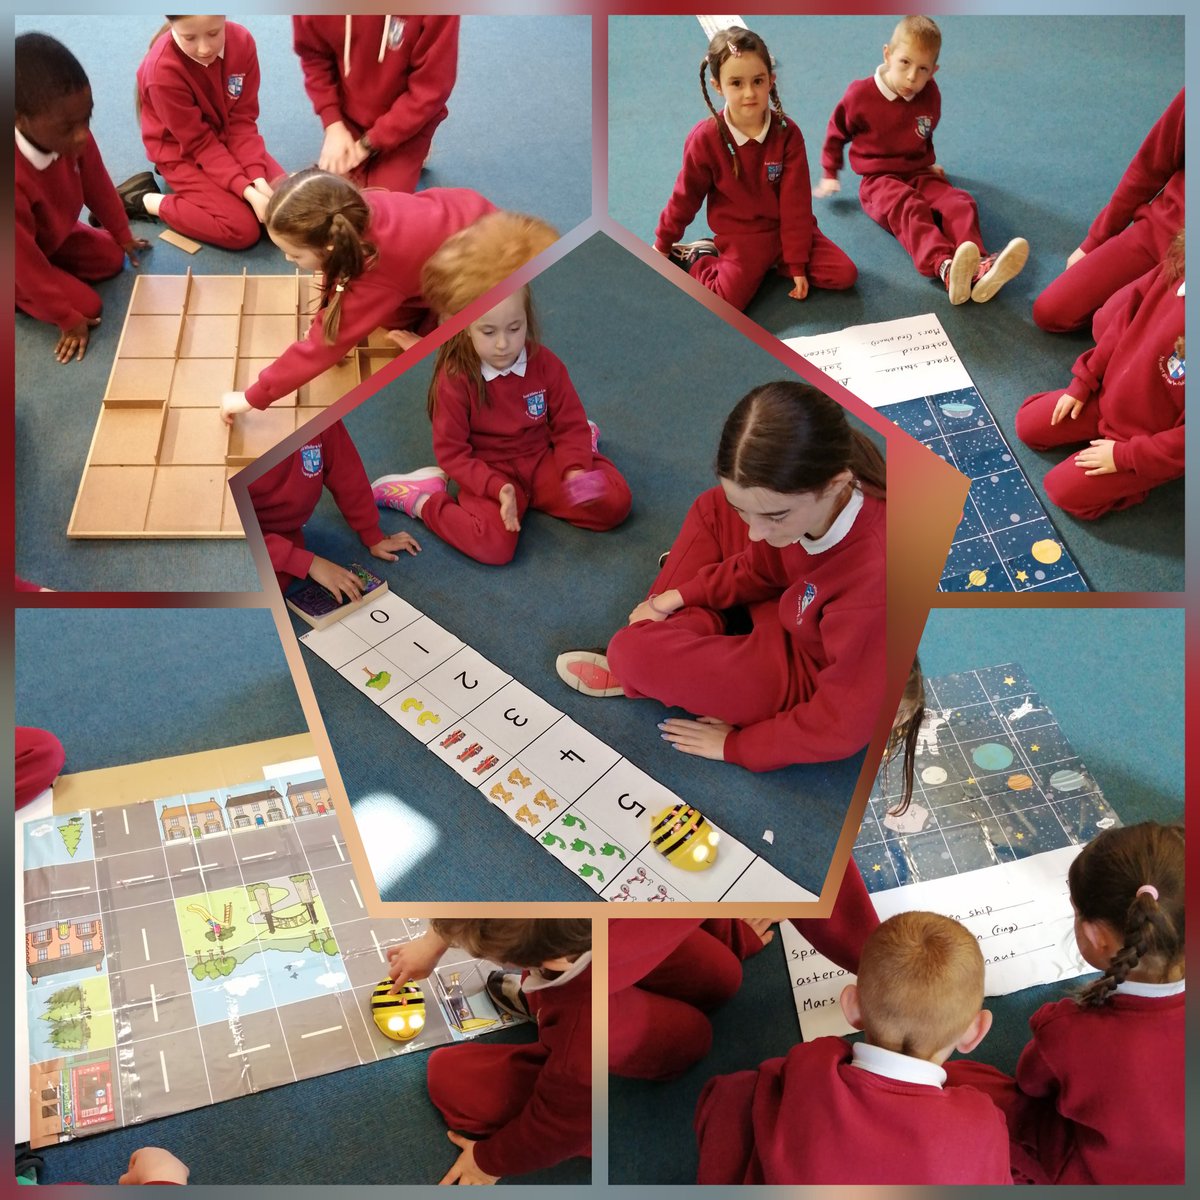 Our younger pupils got an introduction to coding this week while having great fun with Bee-Bots. Thank you to Noreen and Edel in @LEC and the pupils in 5th & 6th for peer teaching. They explored mazes, number line, 2 D shapes and the Solar system.